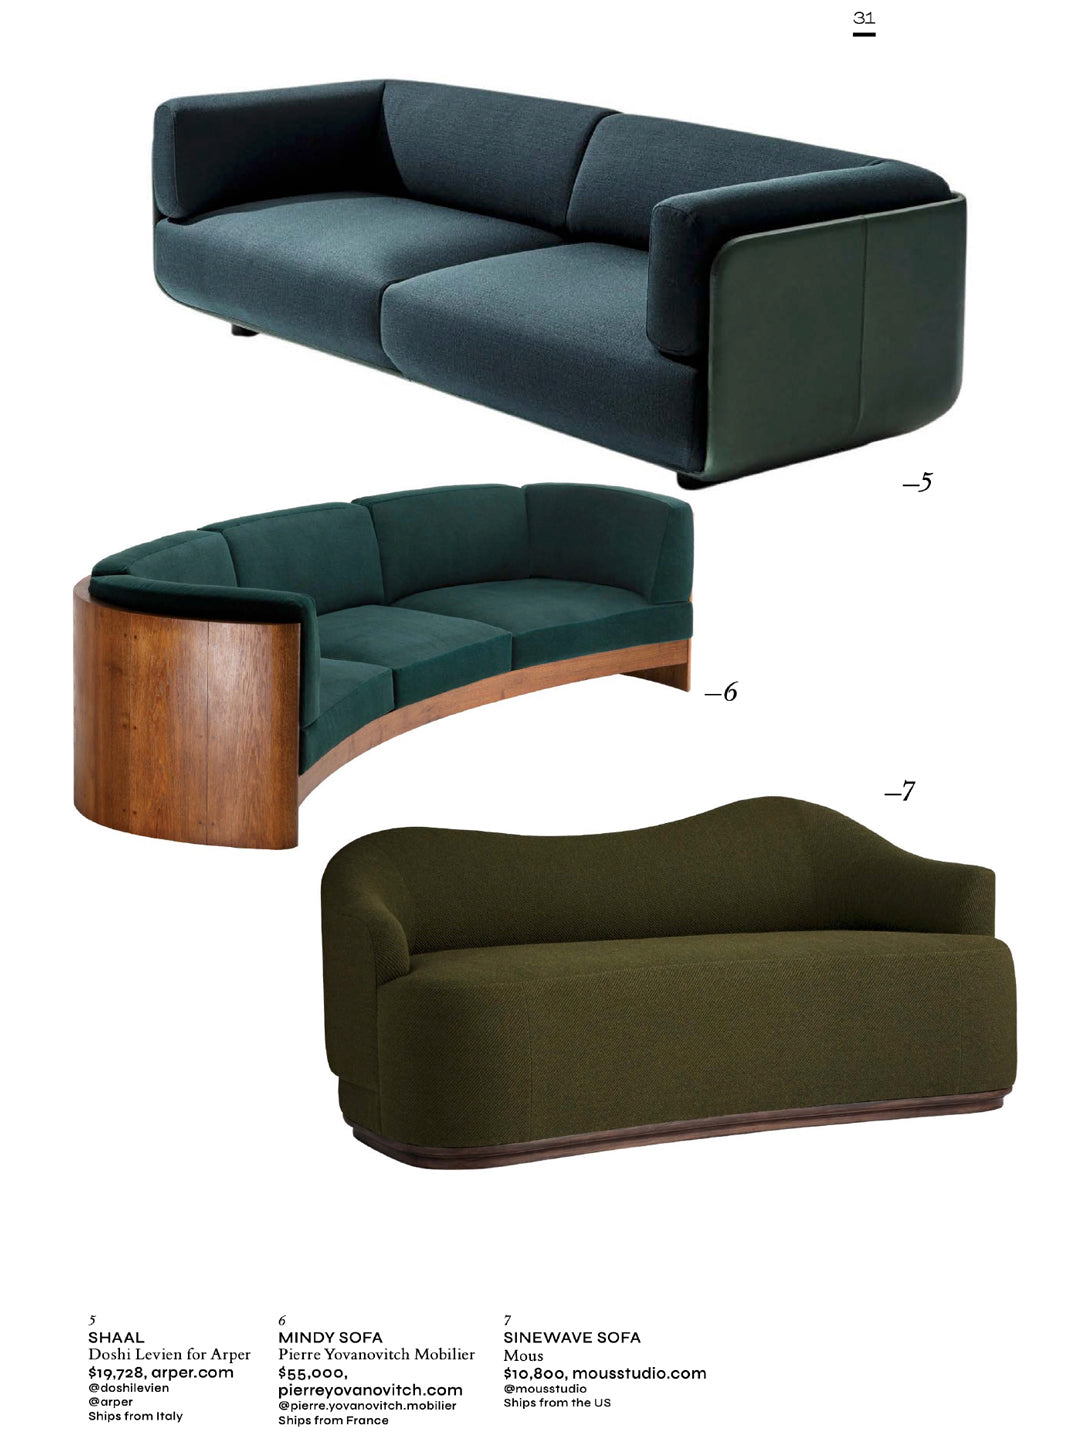 MOUS- Sinewave Sofa featured in Sight Unseen Yearbook